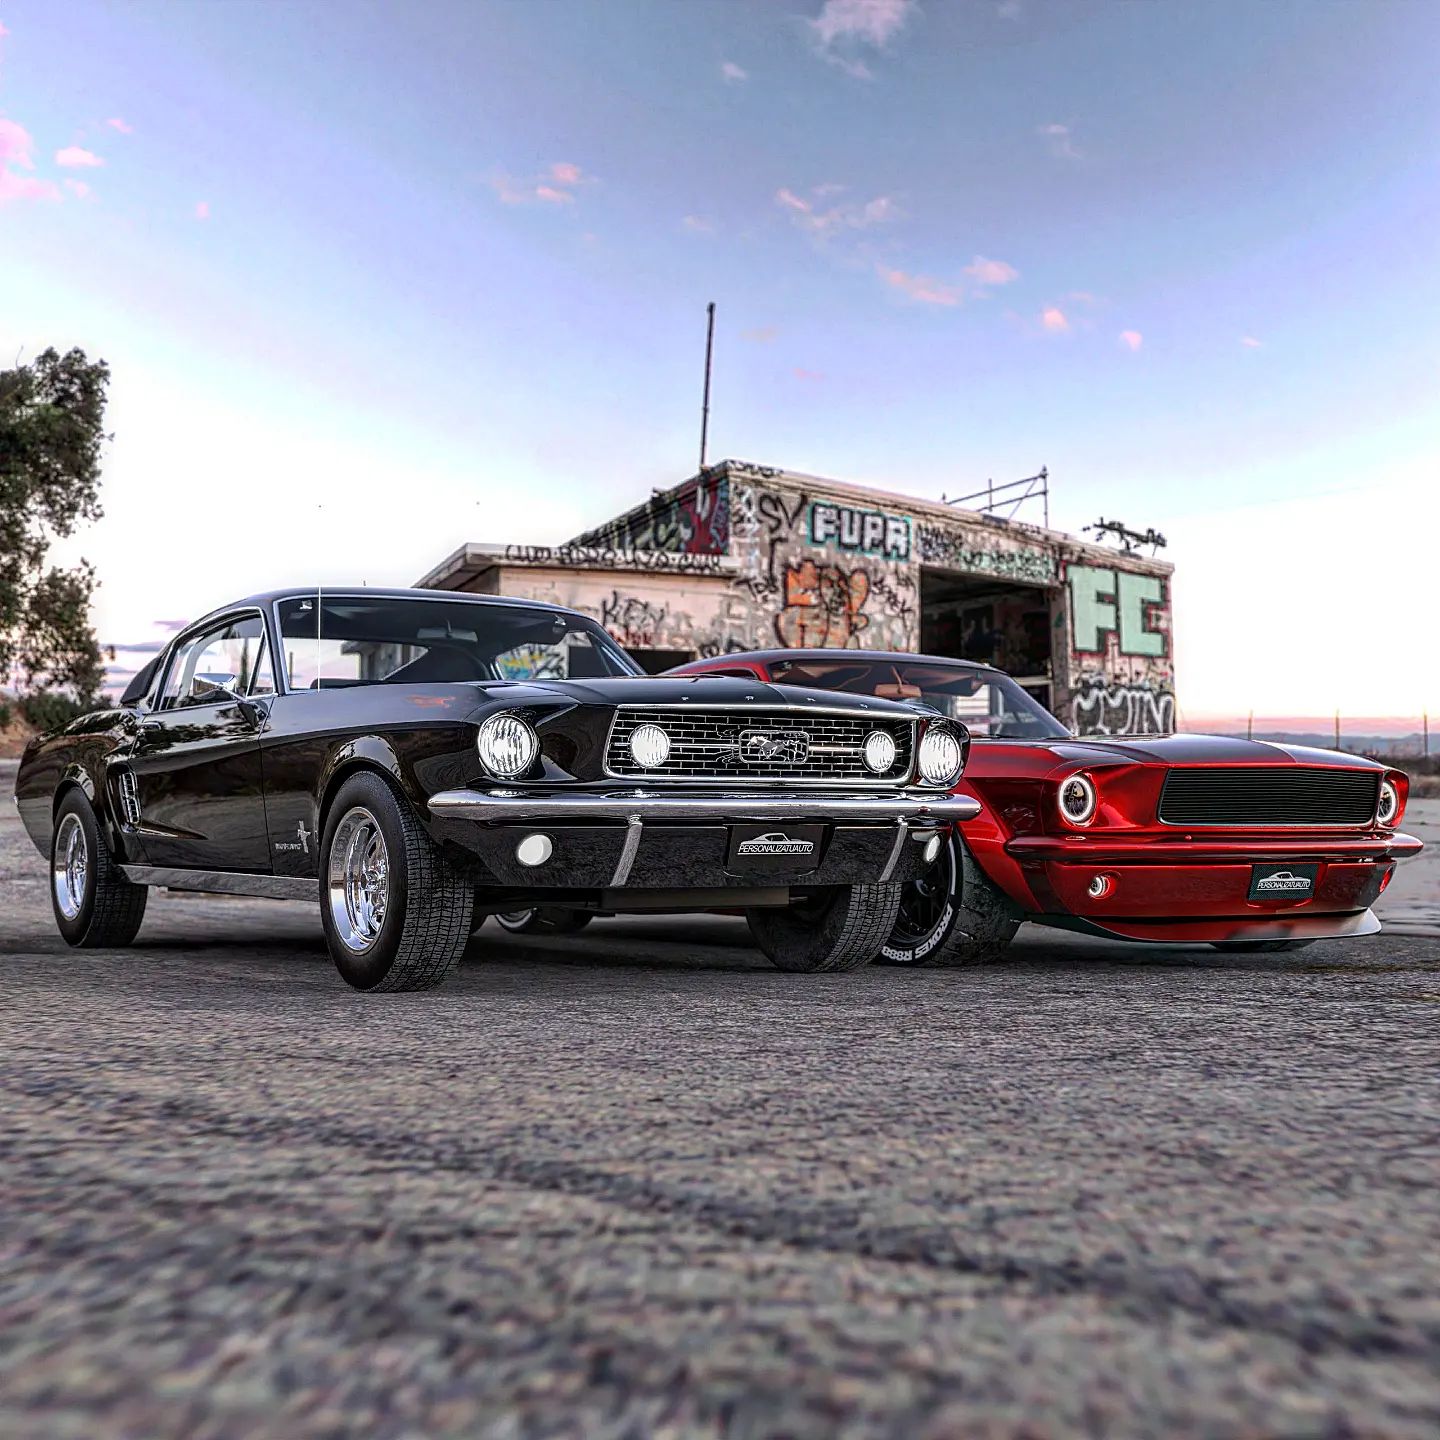 Virtual 1967 Ford Mustang Arrives Slammed and Widebodied, Meets an ...